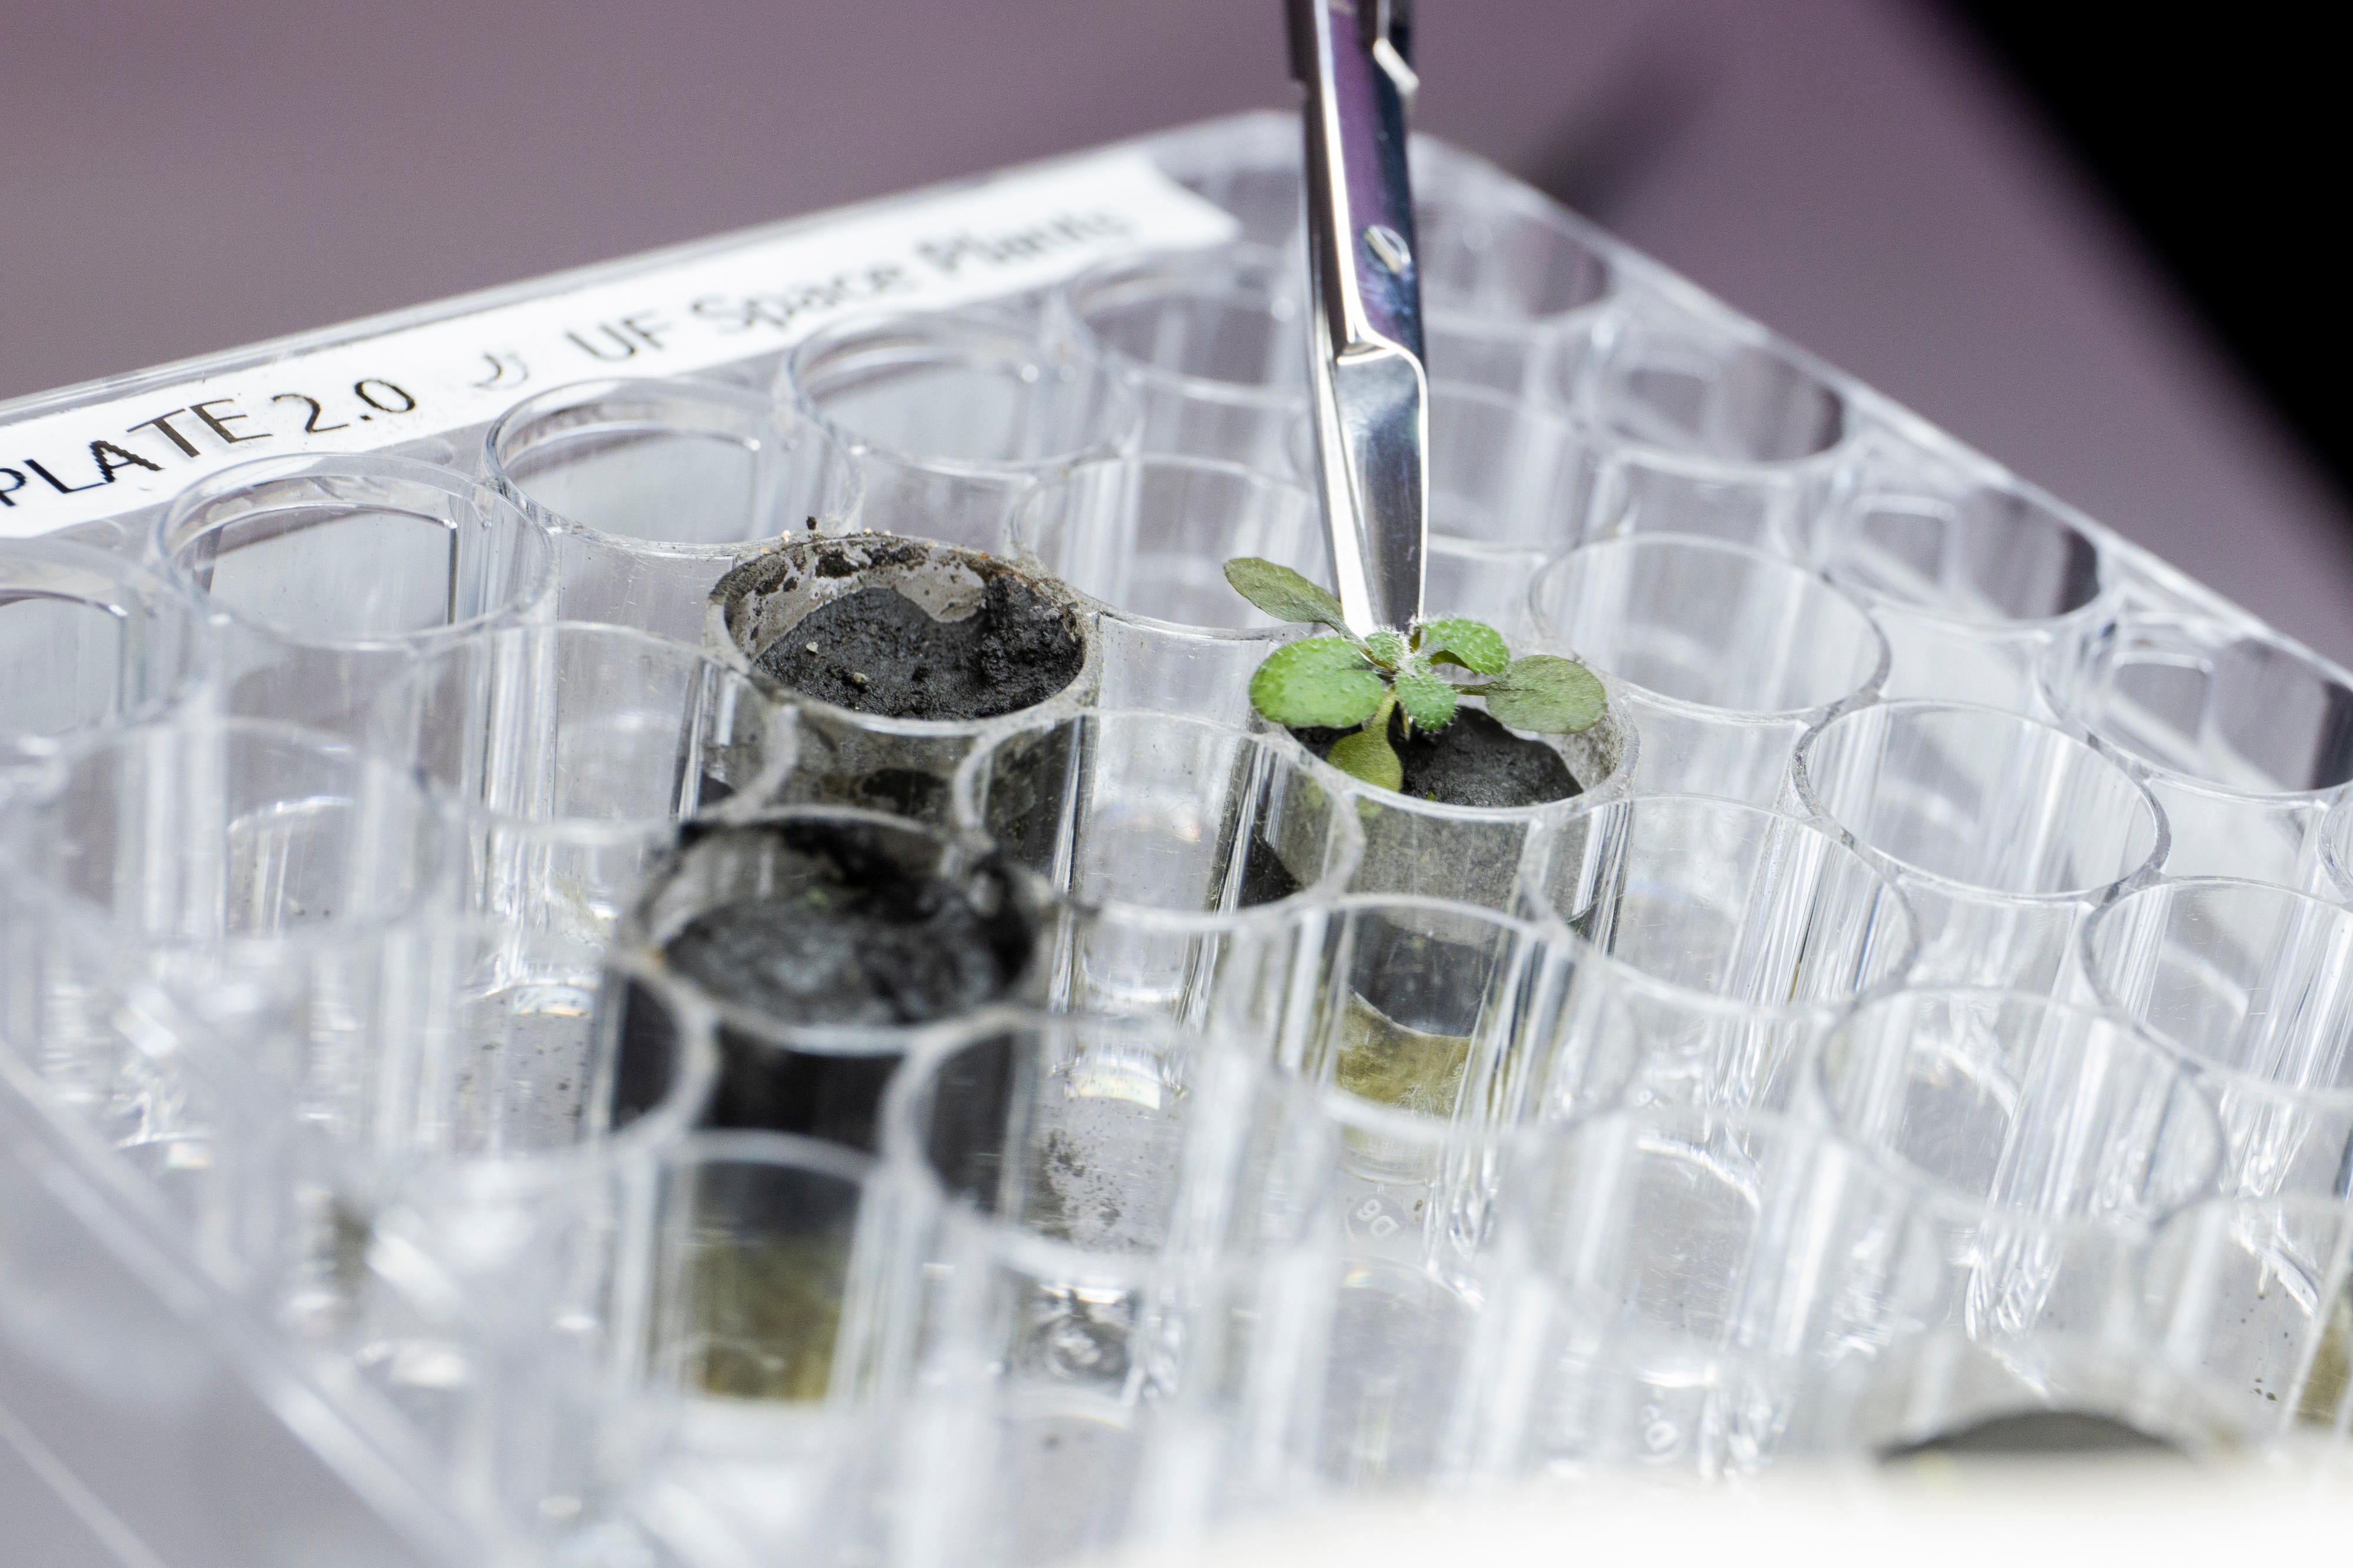 Harvesting a thale cress plant grown in lunar soil. (Photo: Tyler Jones, UF/IFAS.)